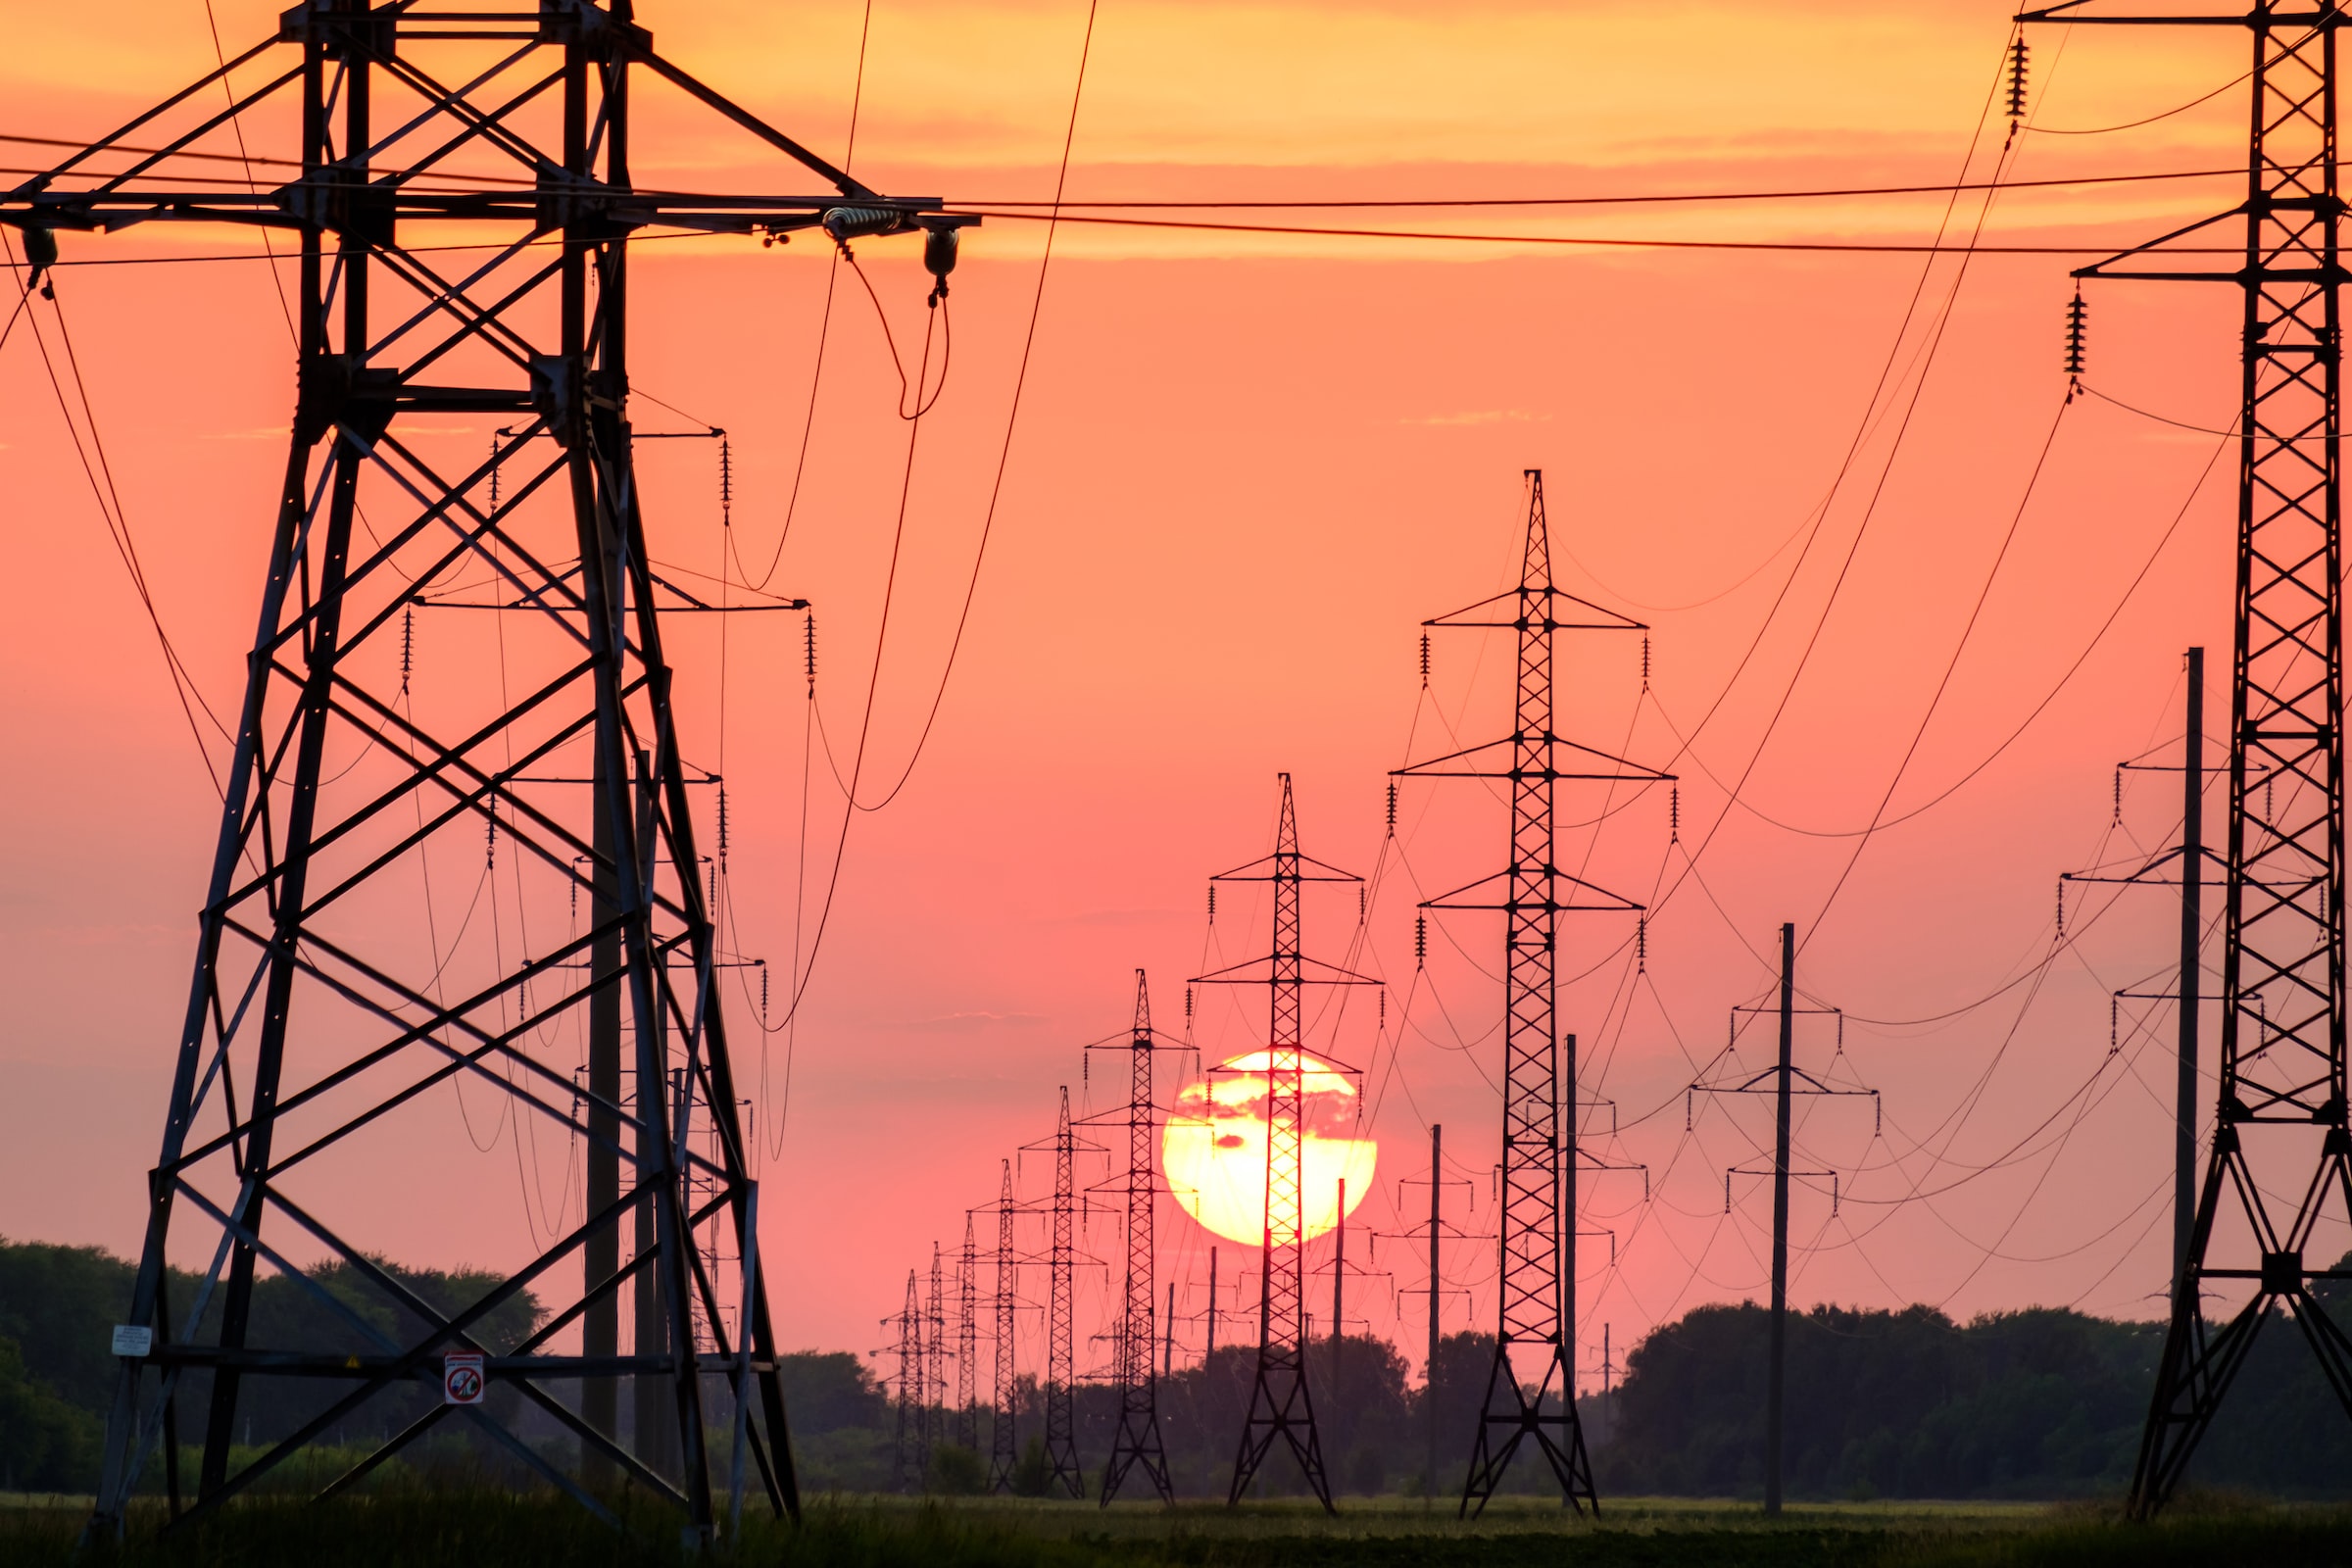 Sunrise with high voltage power lines